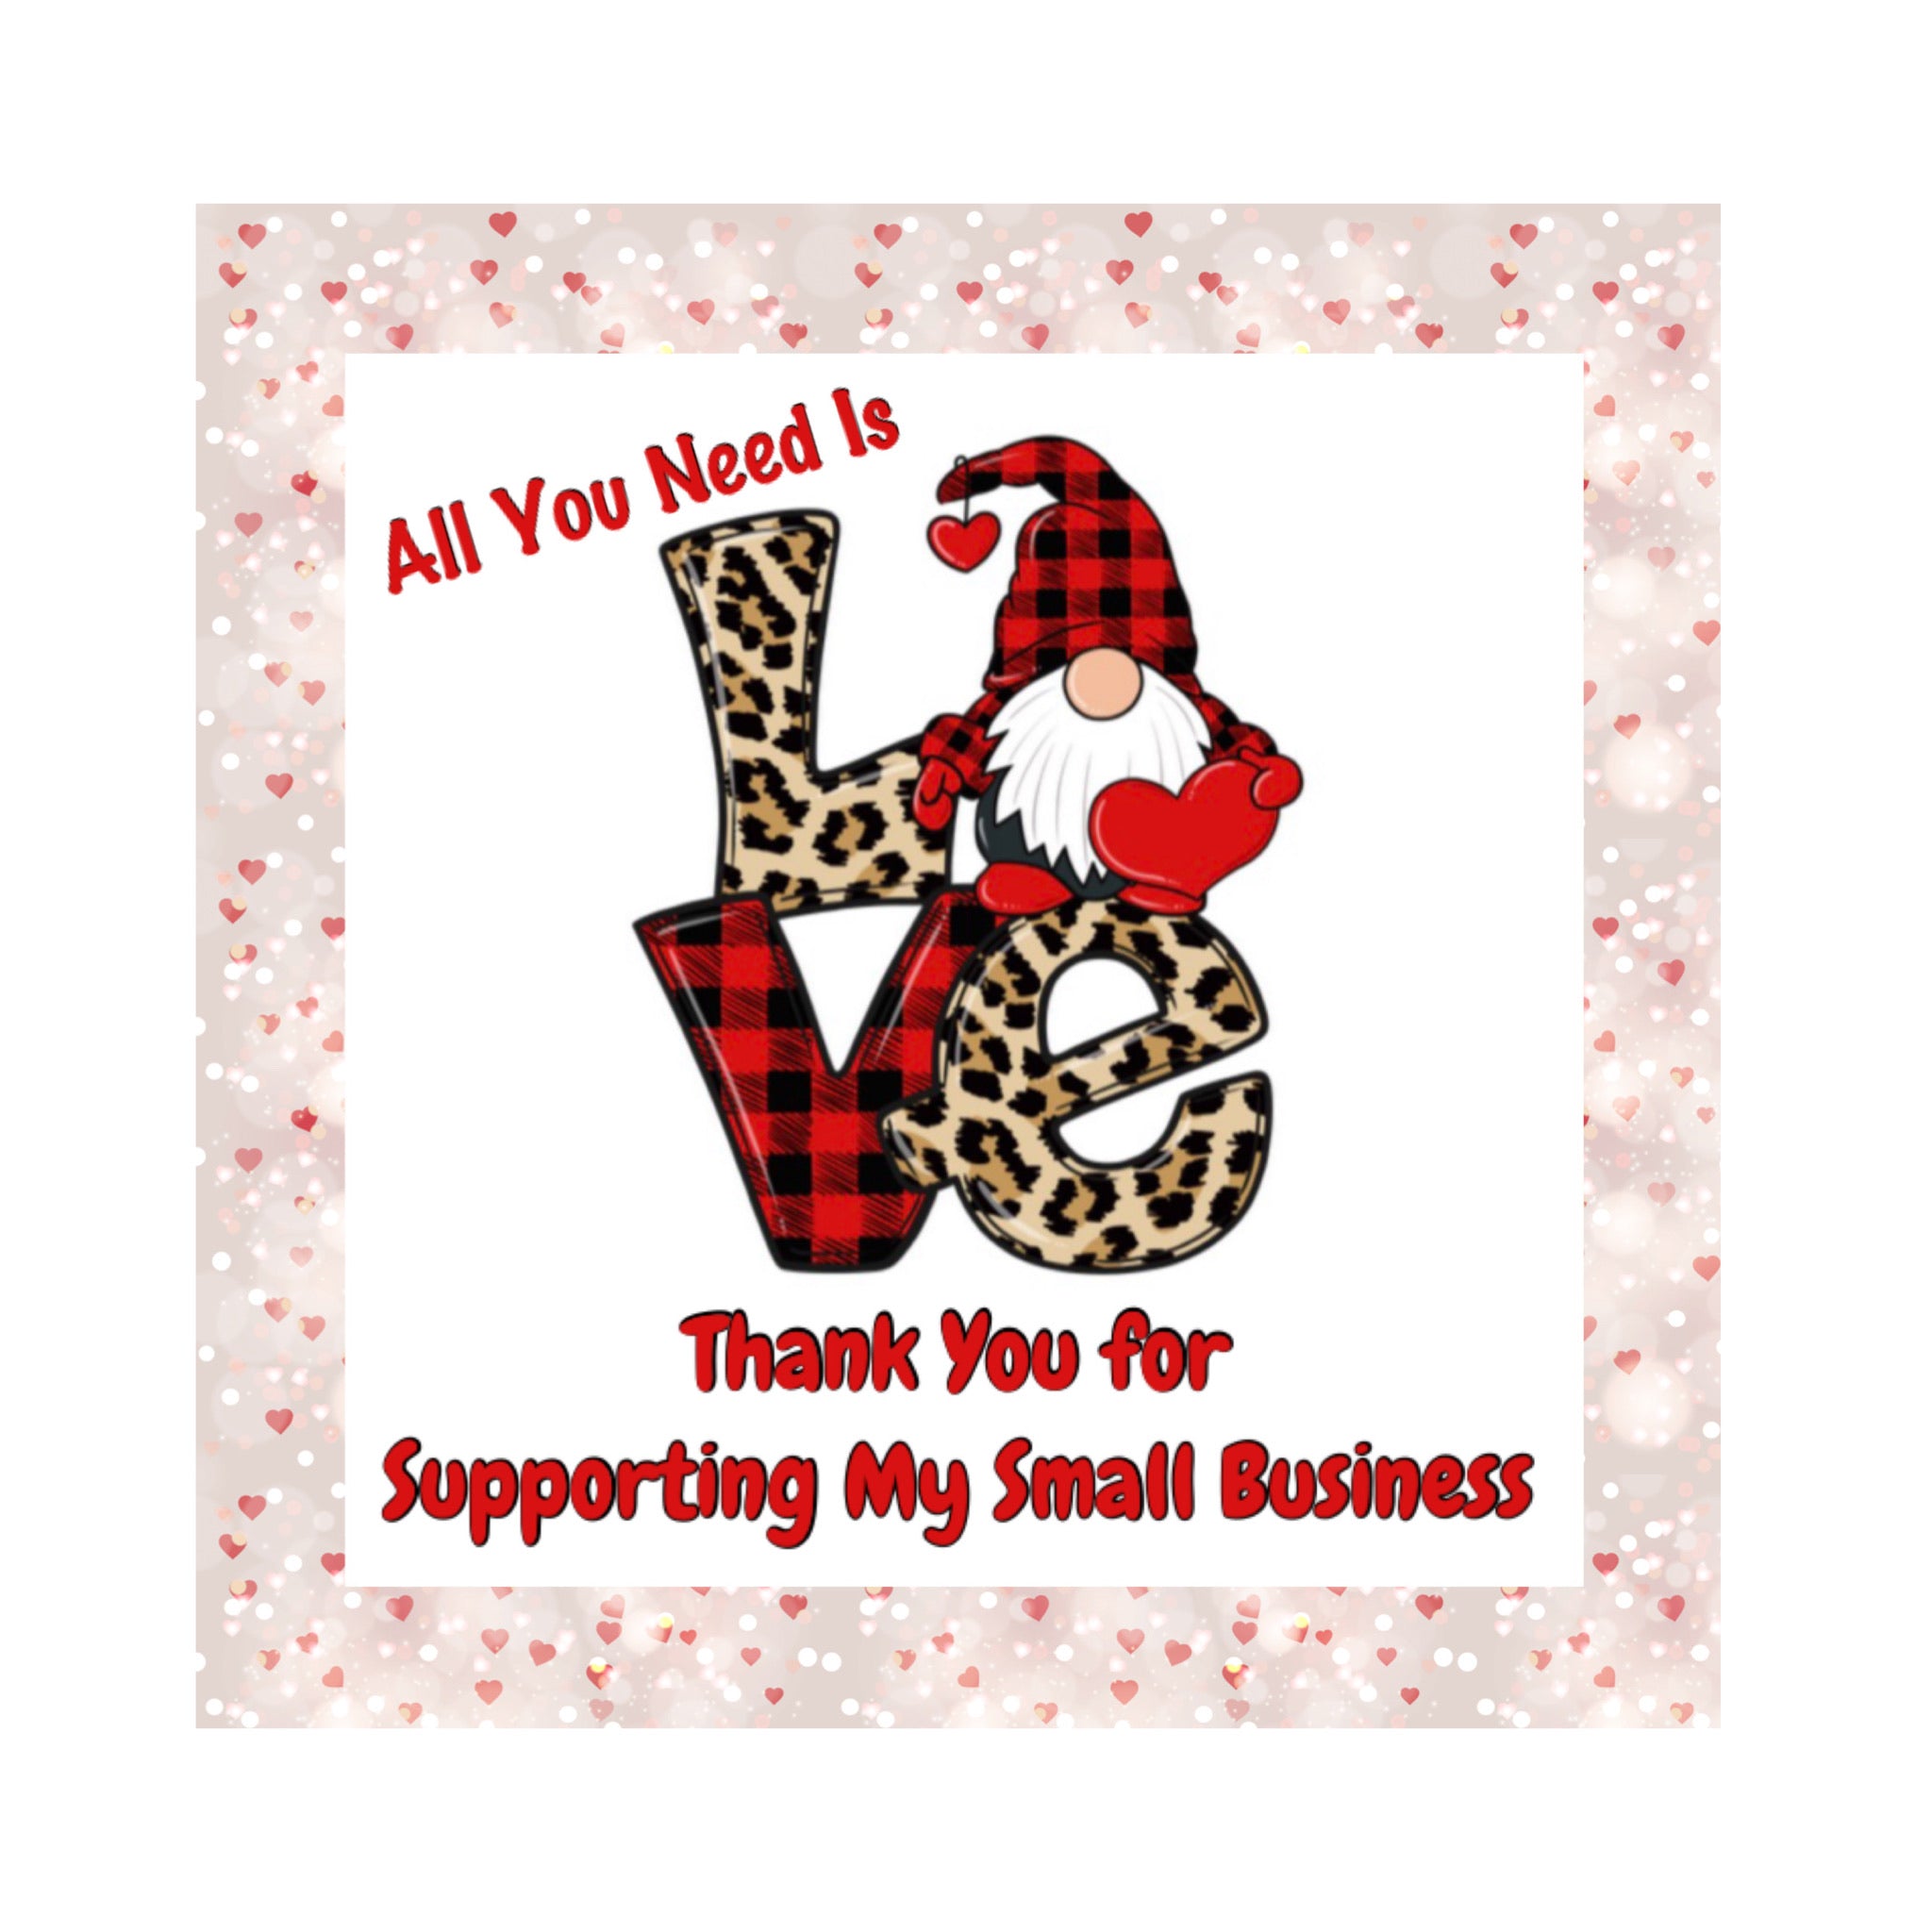 Exclusive! All You Need is Love, Thank You for Supporting My Small Business Gnome Sticker 2x2 Square Stickers, 25 stickers per pack